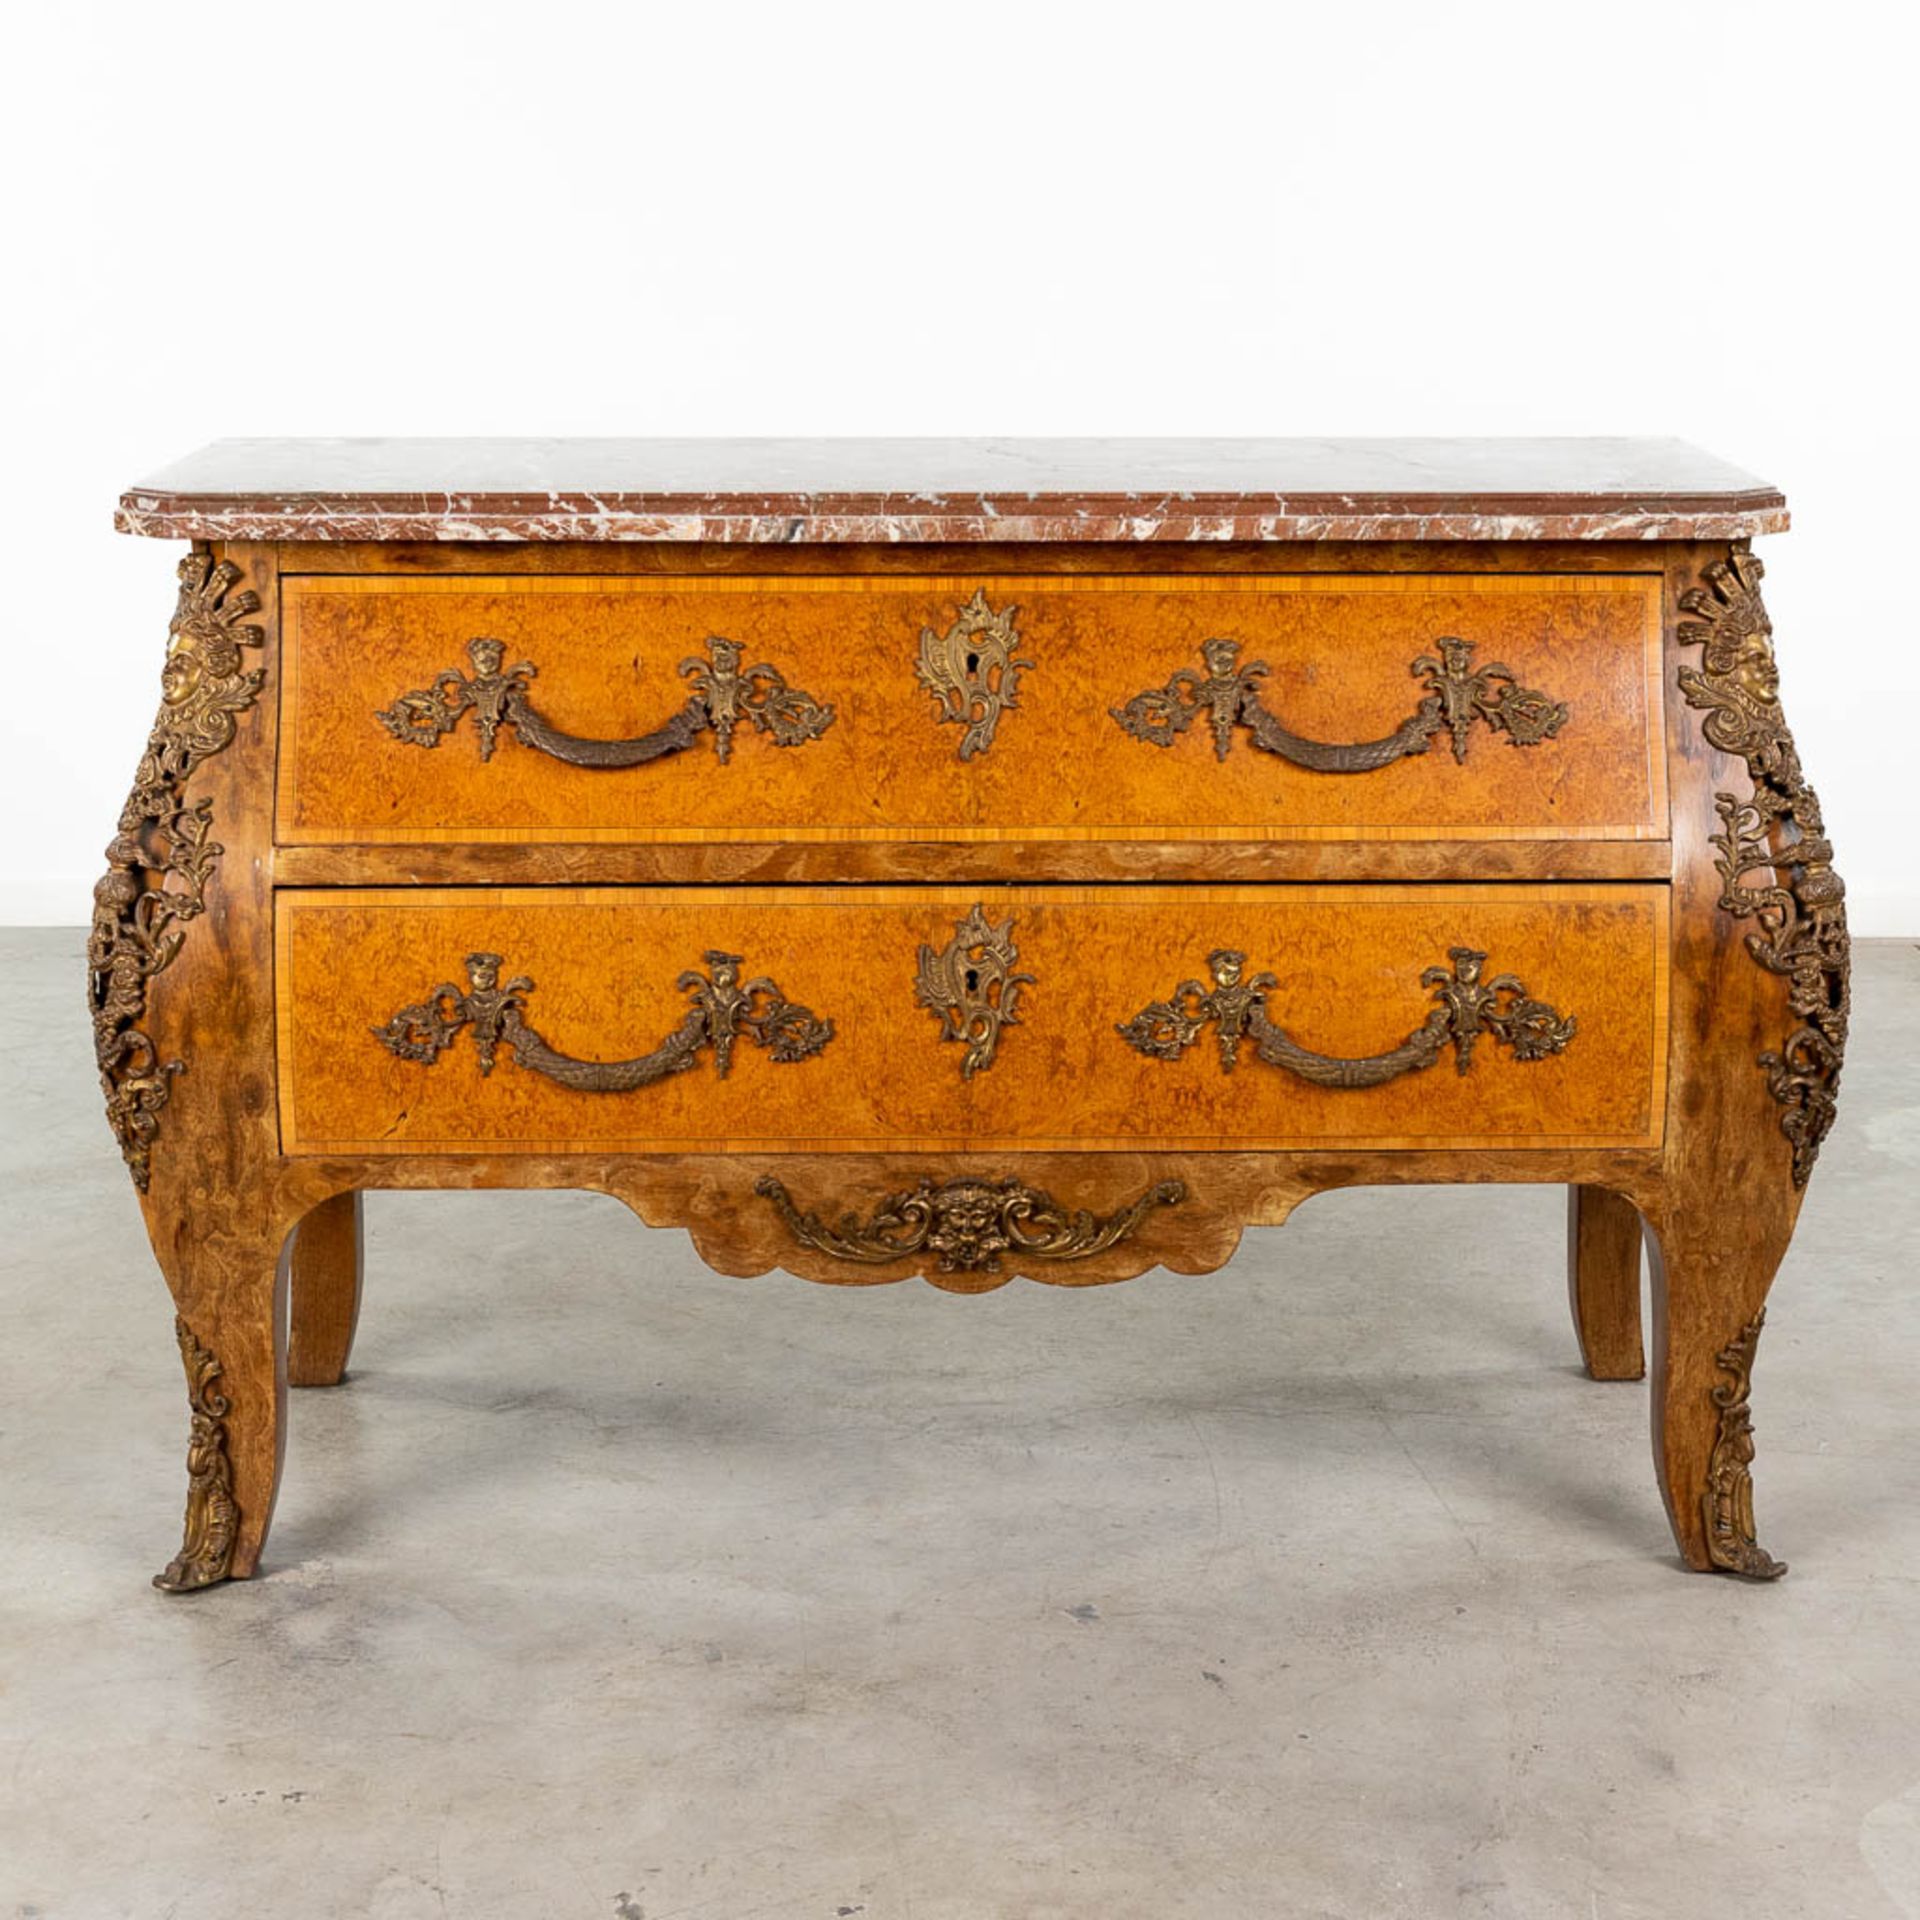 A two-drawer commode mounted with bronze and a marble top. 20th C. (L: 55 x W: 132 x H: 88 cm) - Image 3 of 19